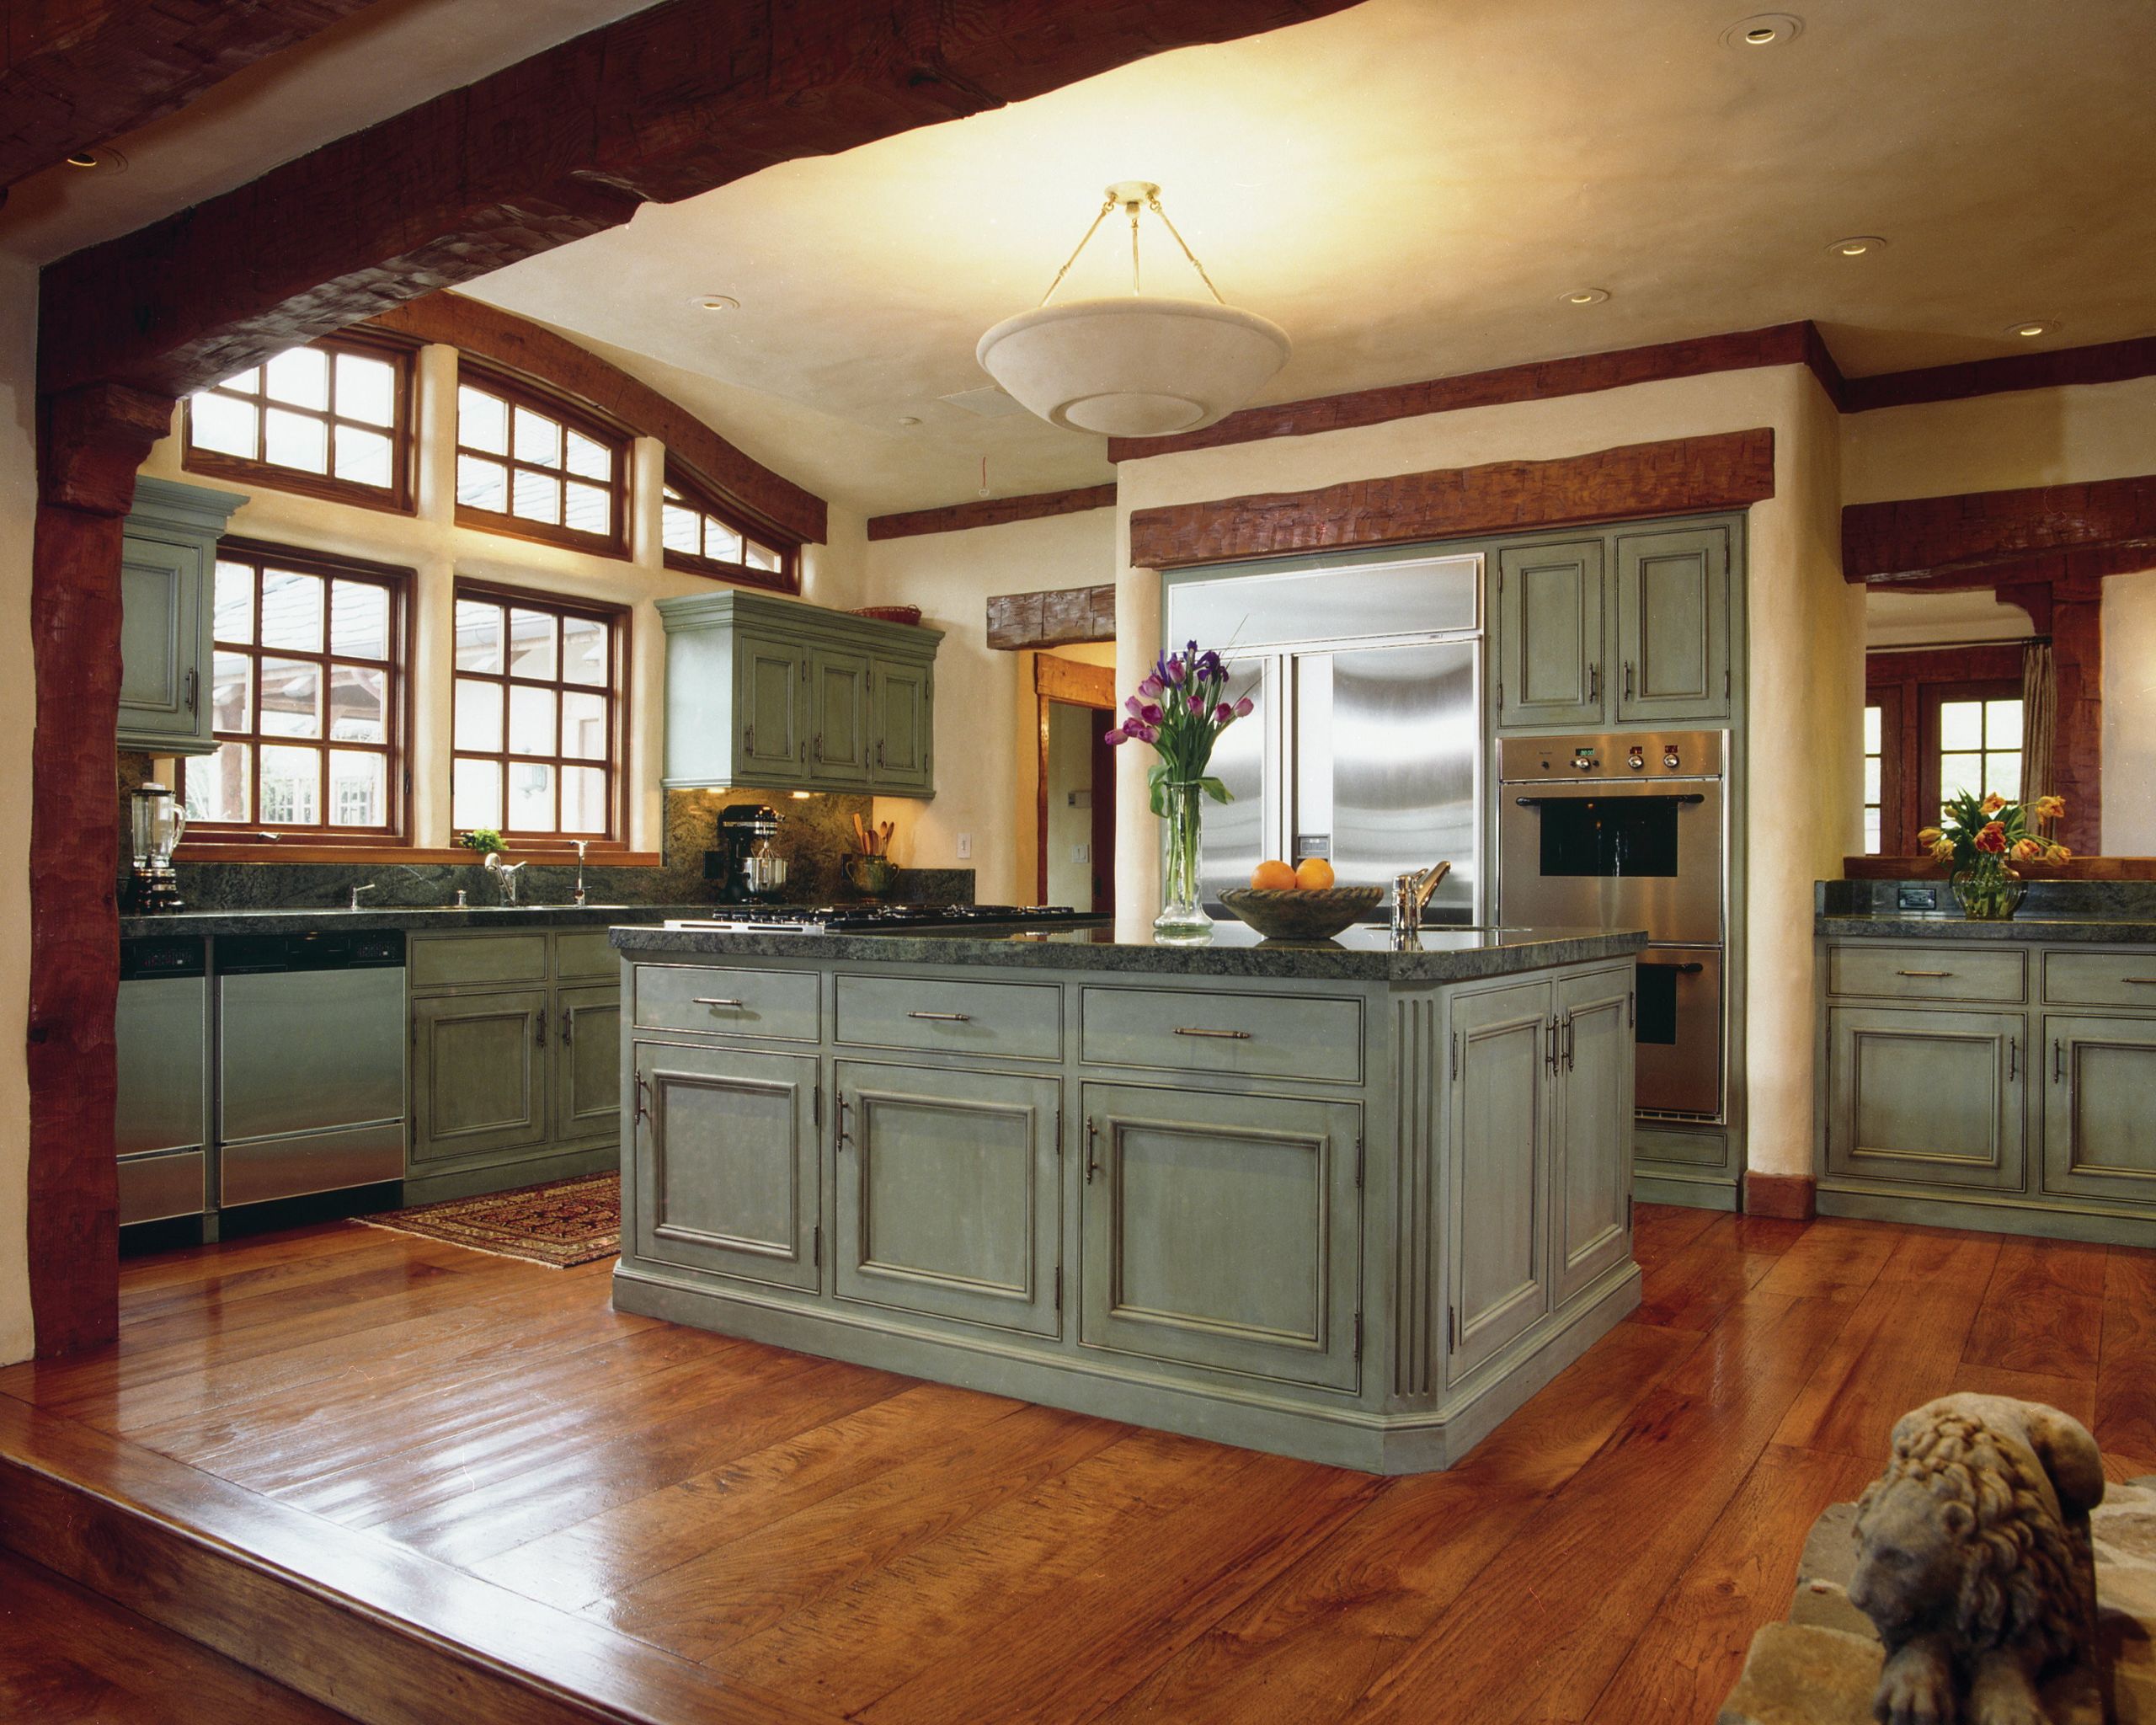 Rustic Painted Kitchen Cabinets
 Gorgeous Antique White Painted Kitchen Cabinets Rustic